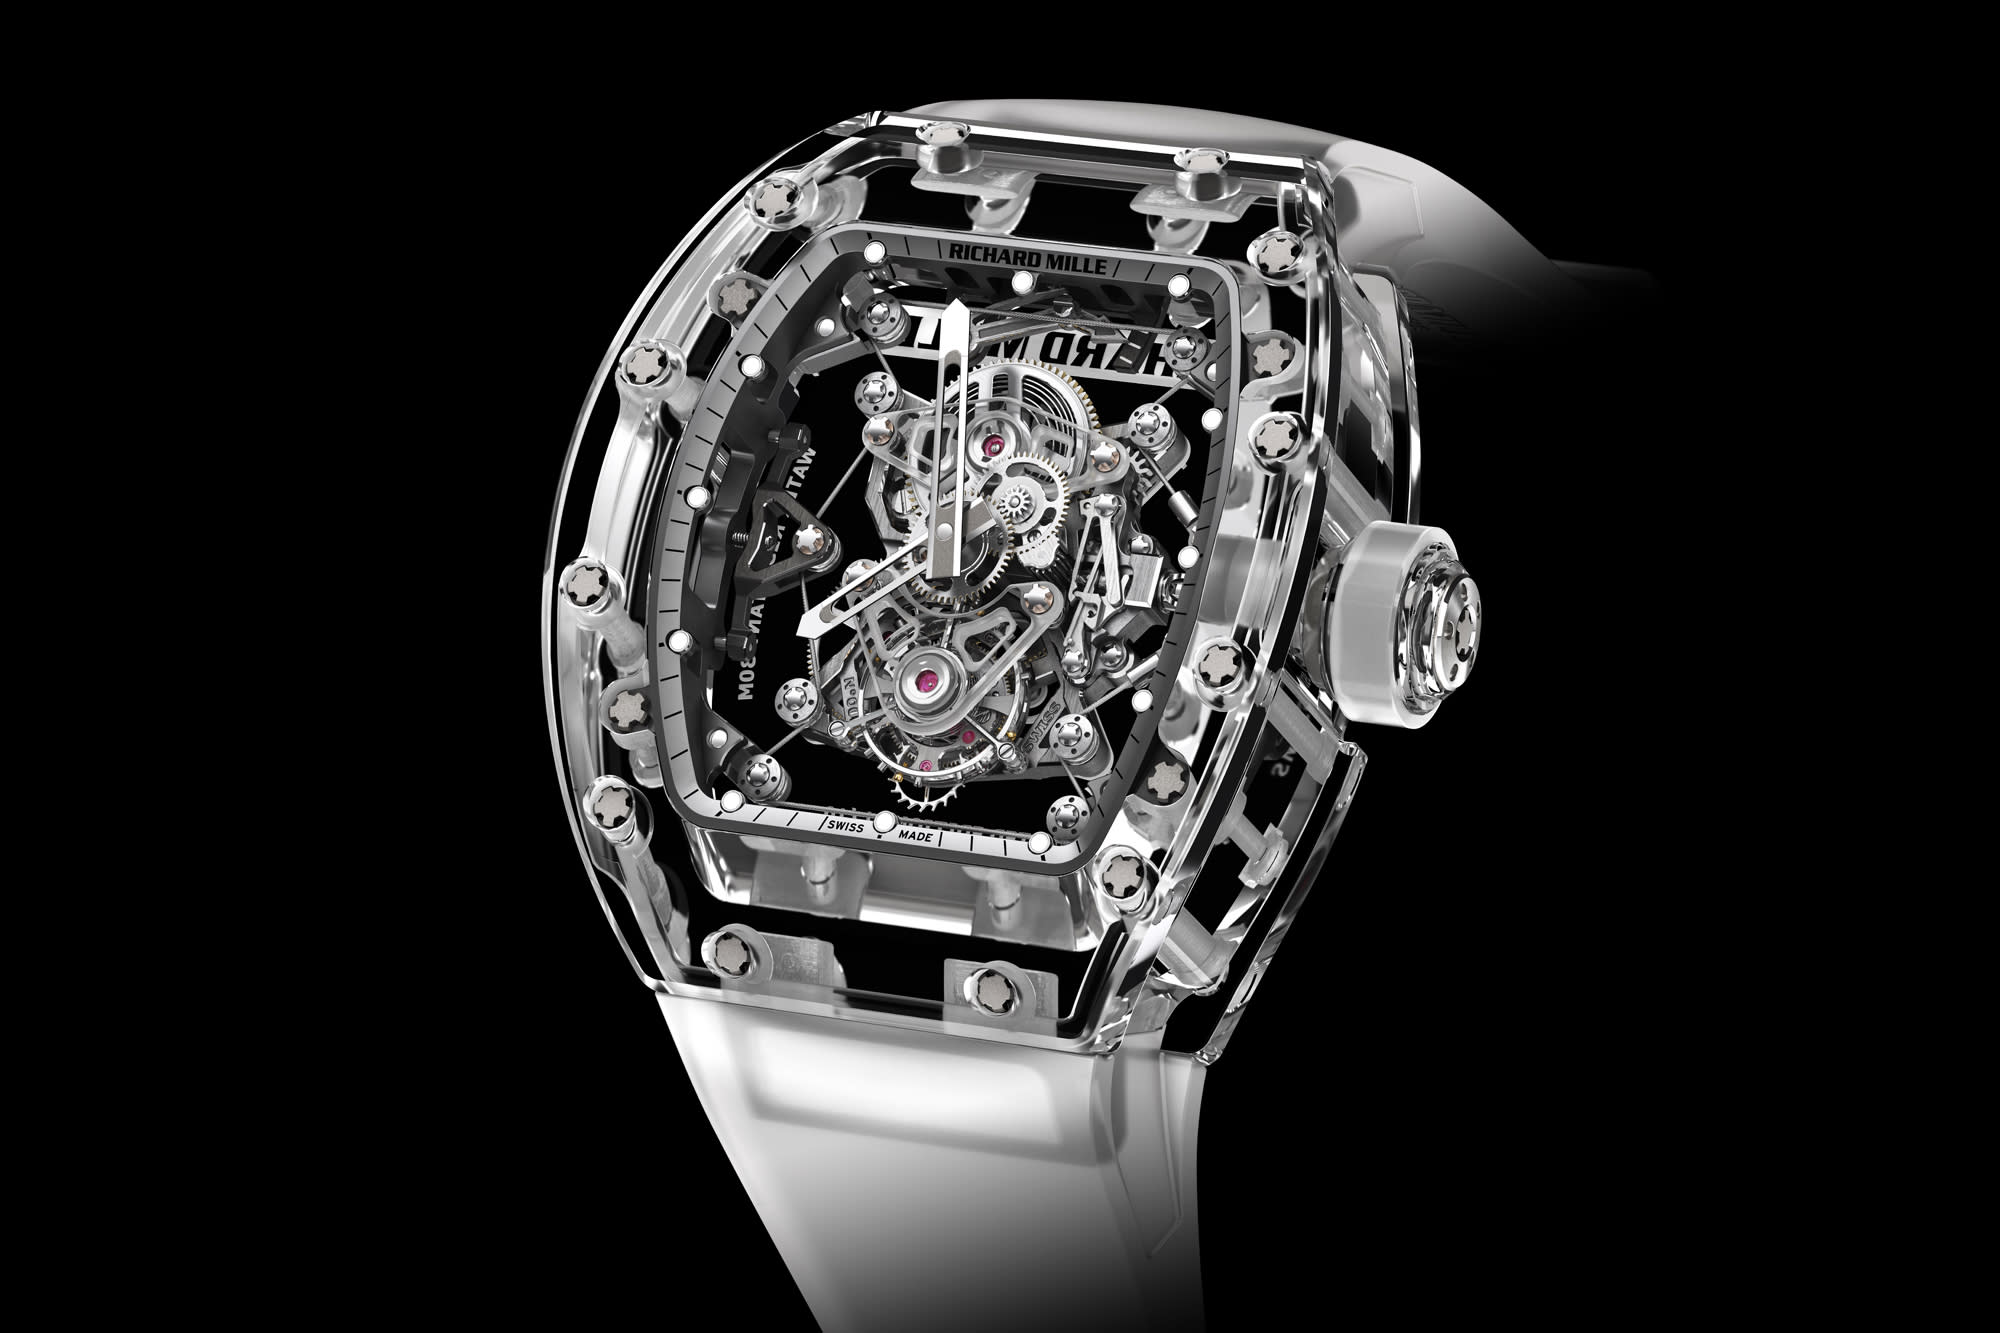 Richard Mille S 2 Million Watch Already Sold Out